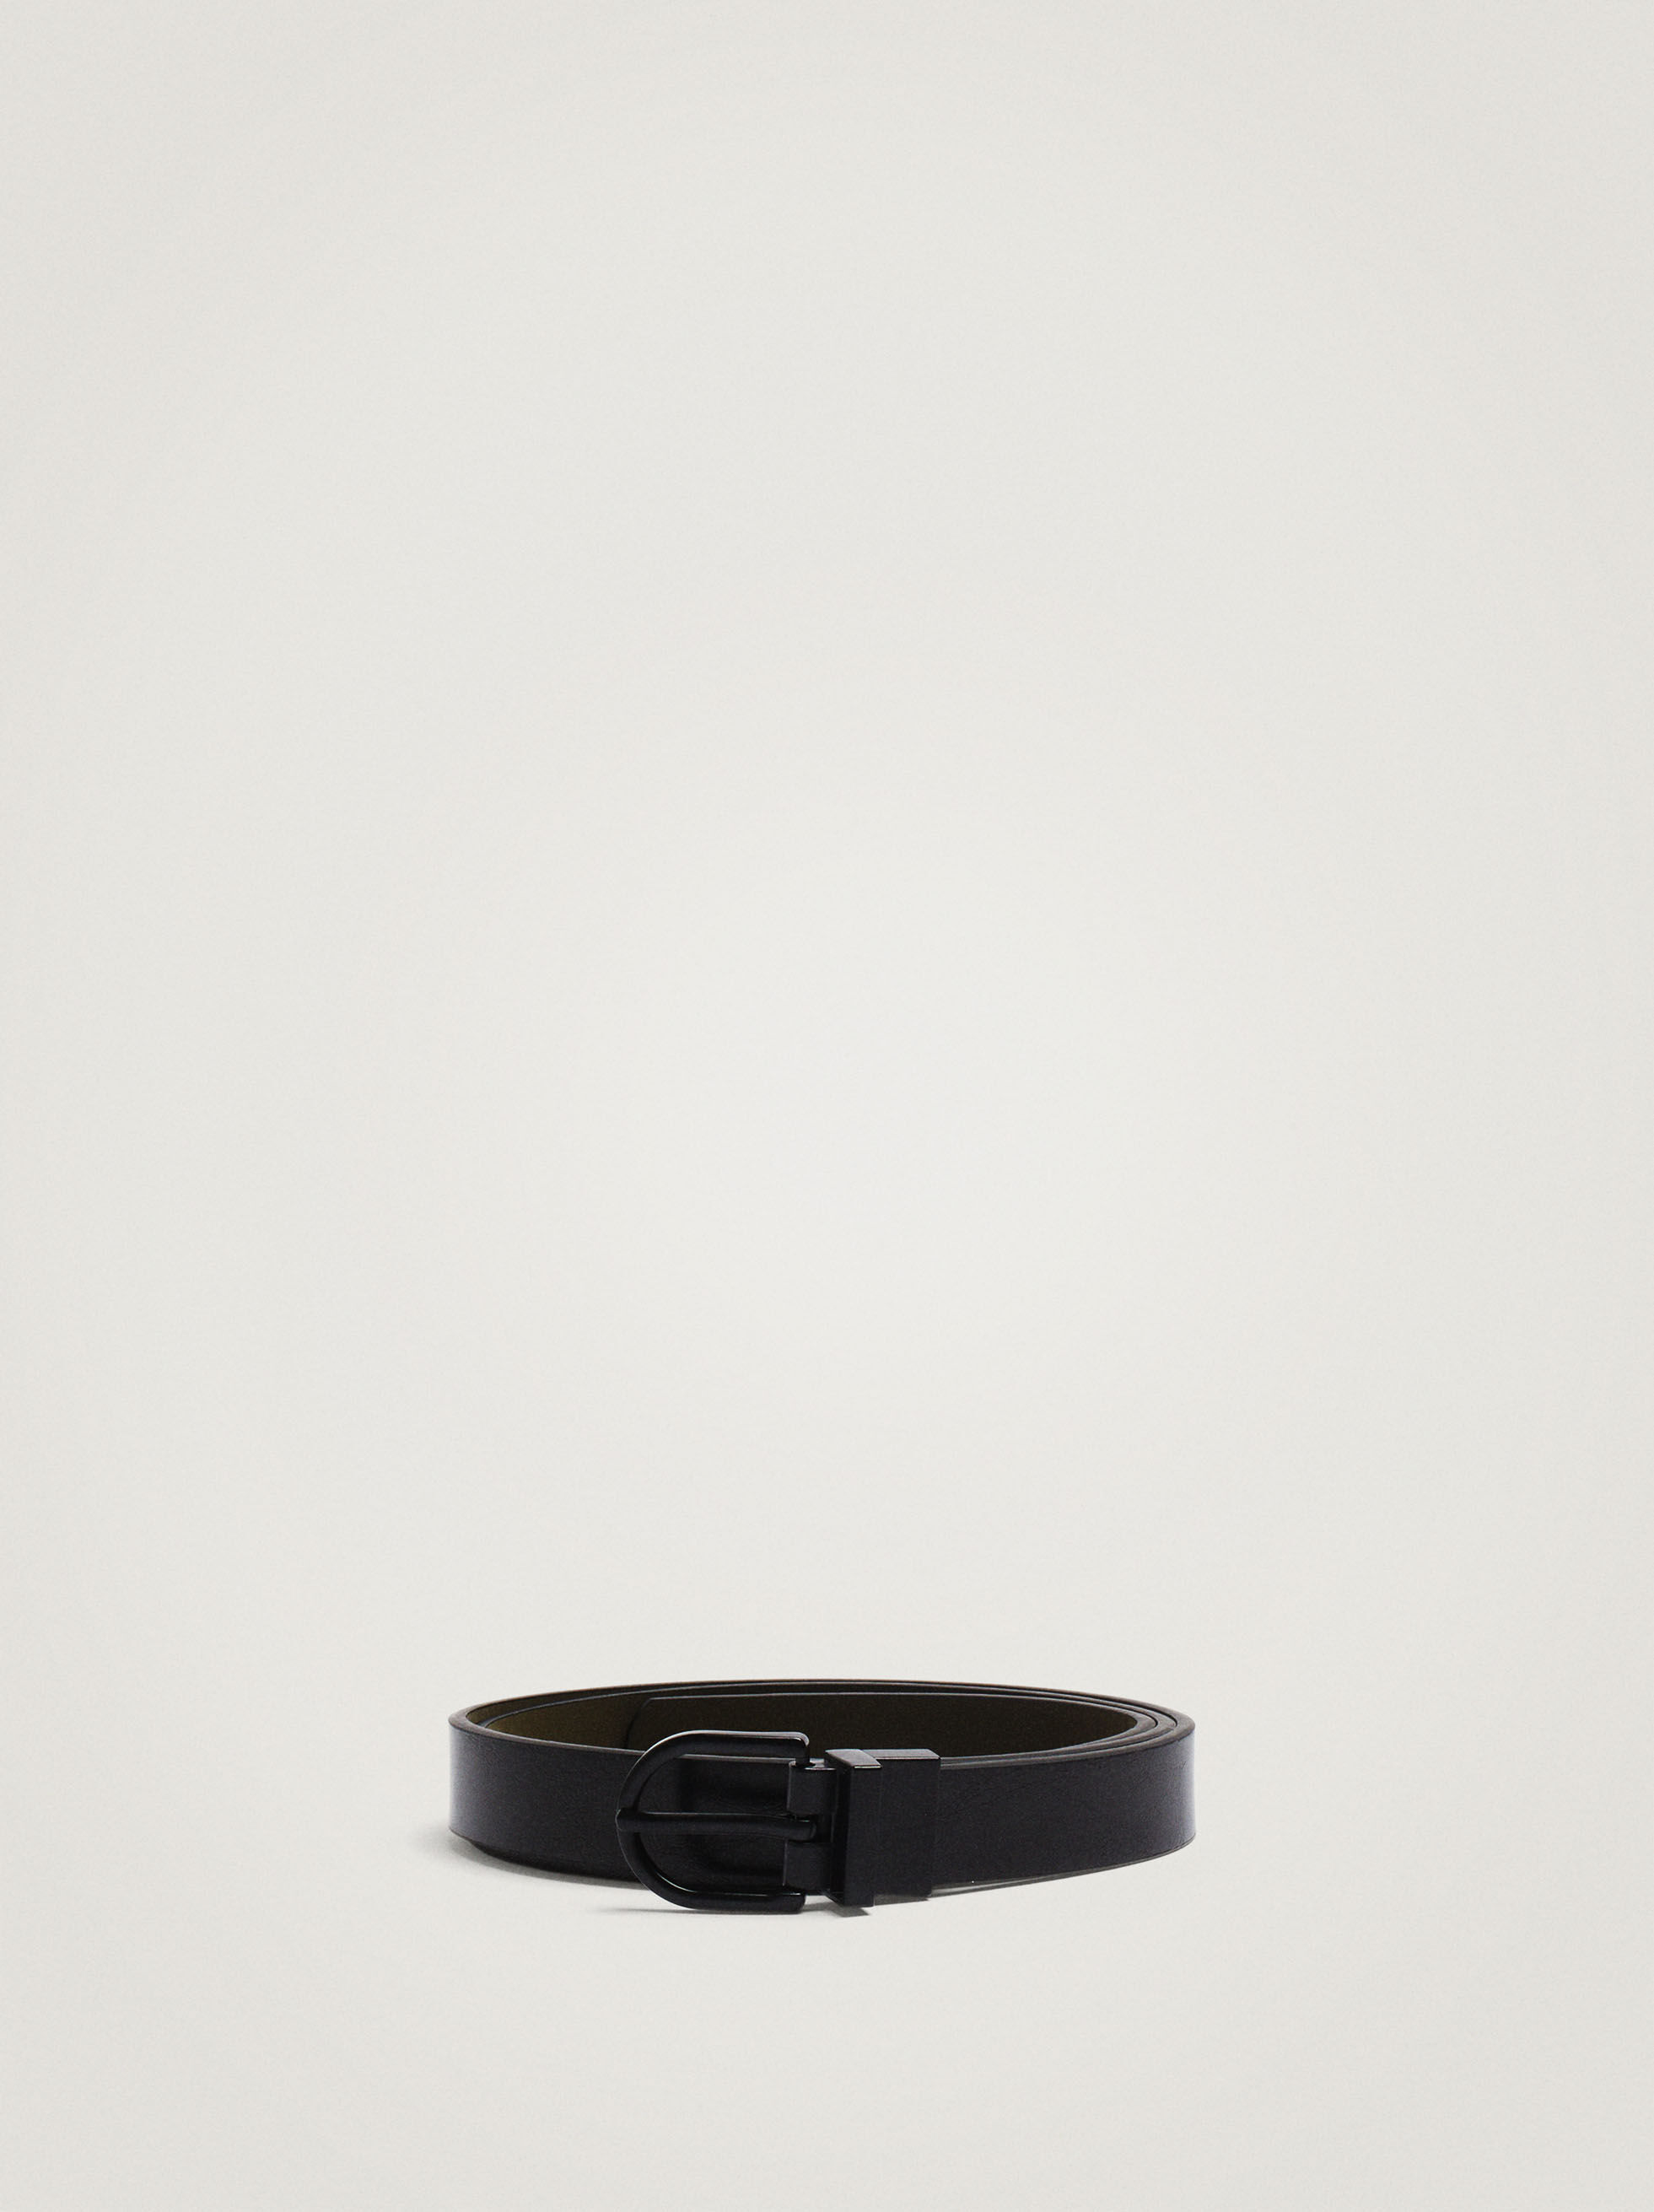 Womens Accessories Belts COS Classic Leather Belt in Black 